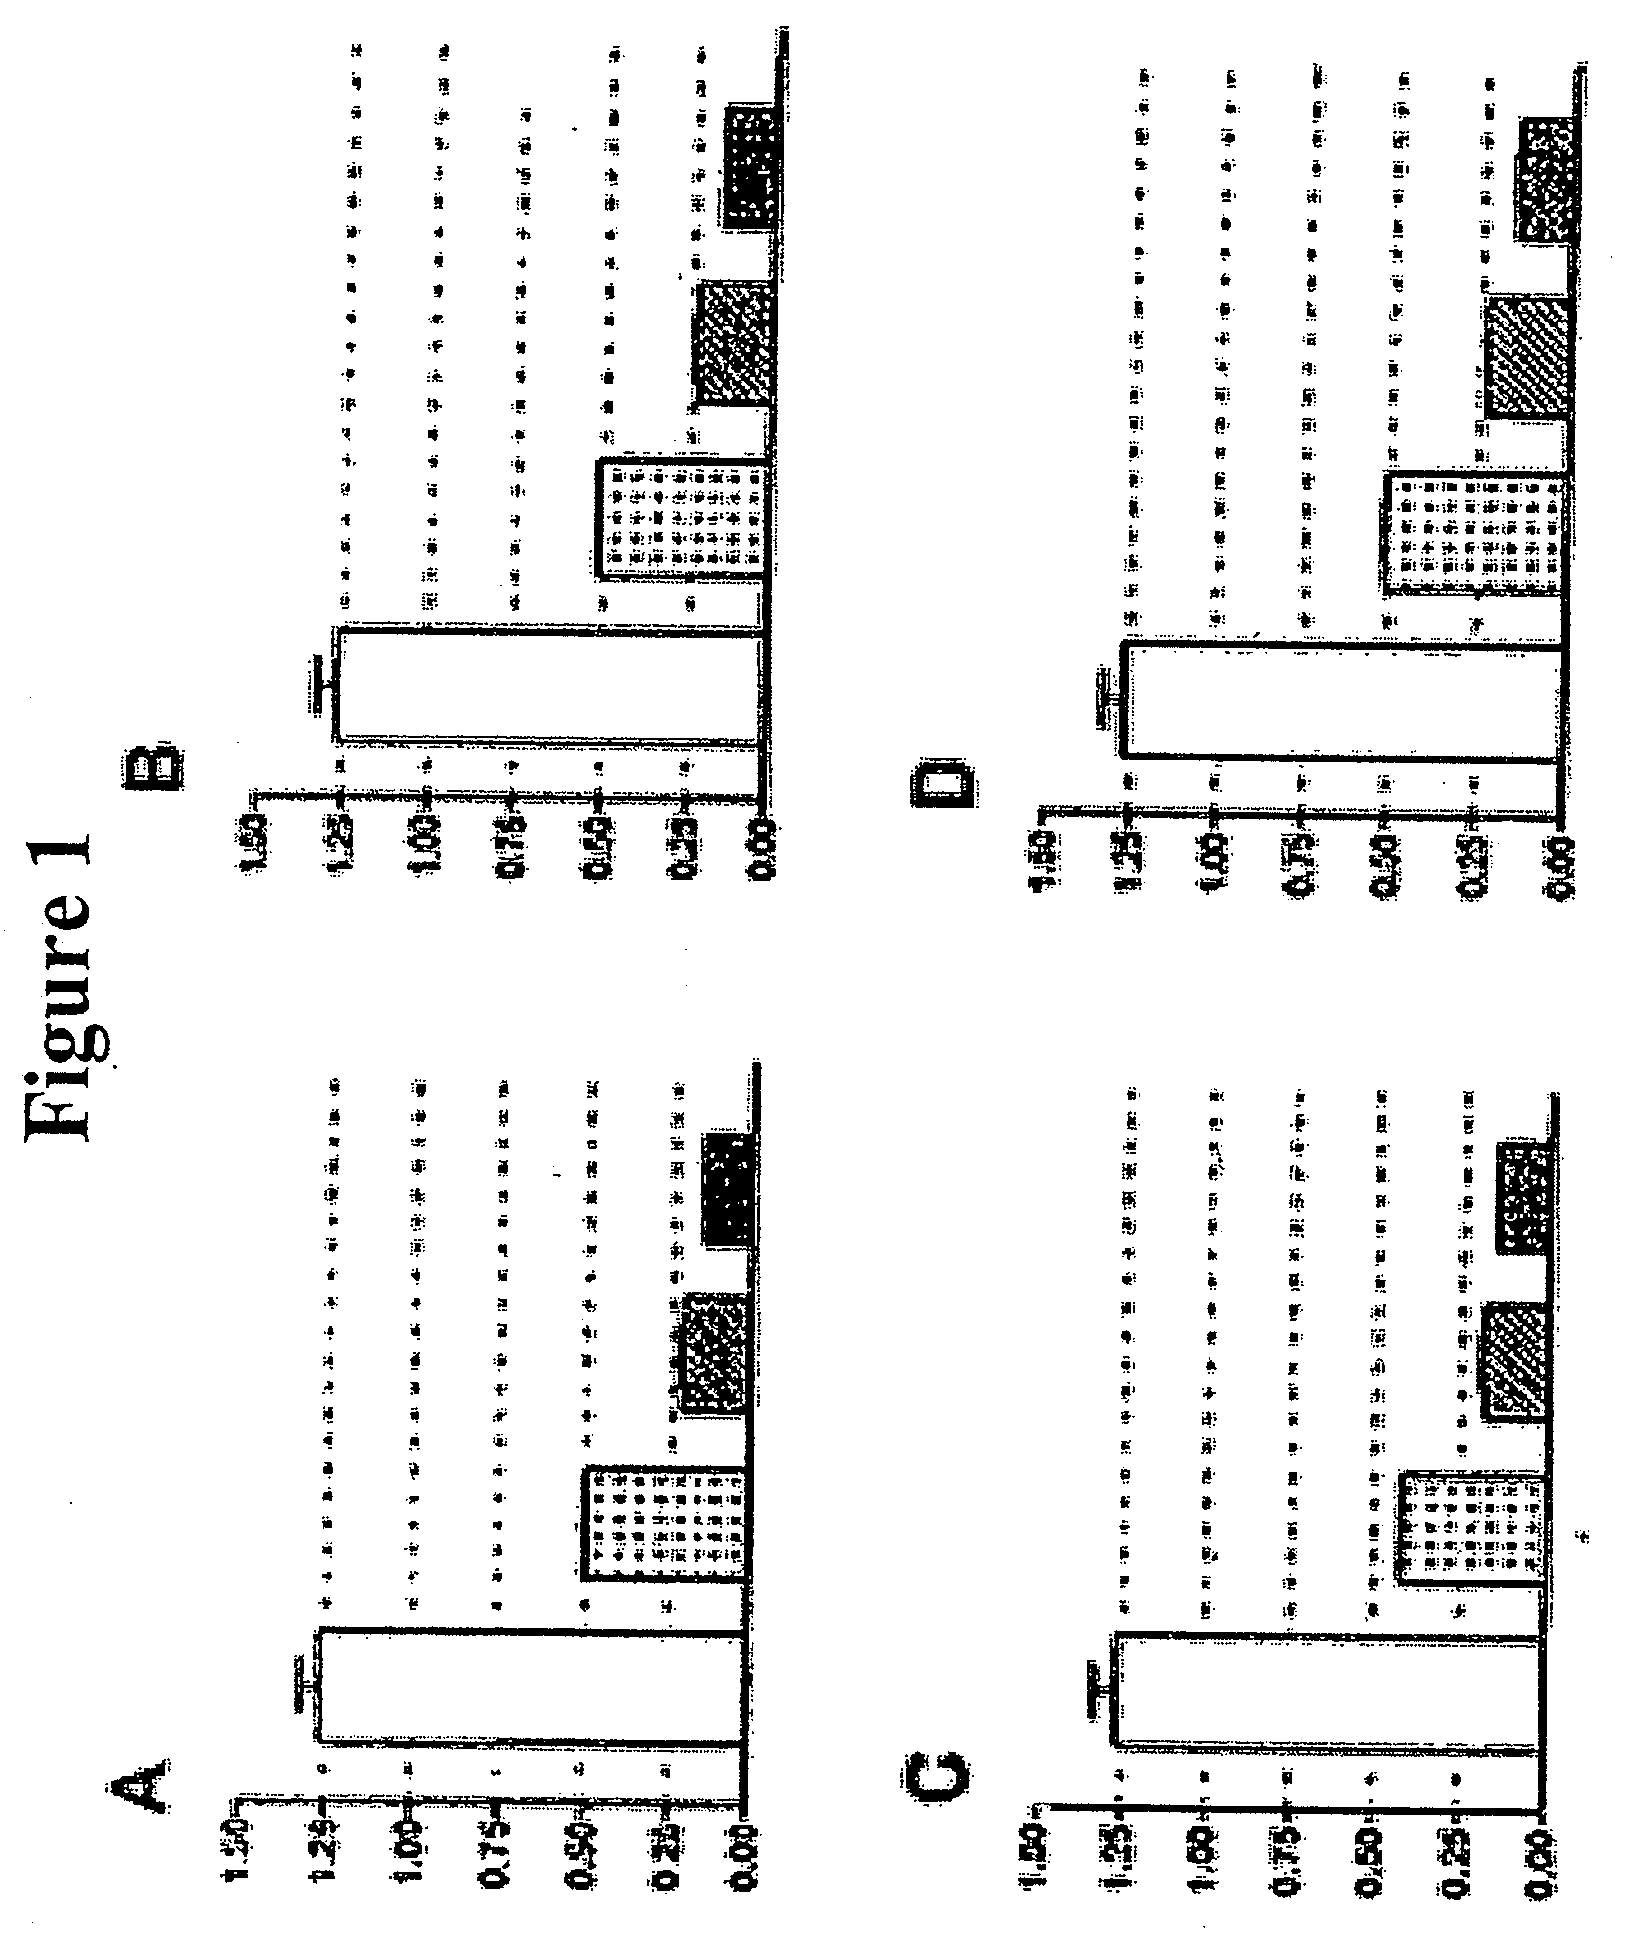 Methods of use for 2,5-dihydroxybenzene sulfonic acid compounds for the treatment of cancer, rosacea and psoriasis